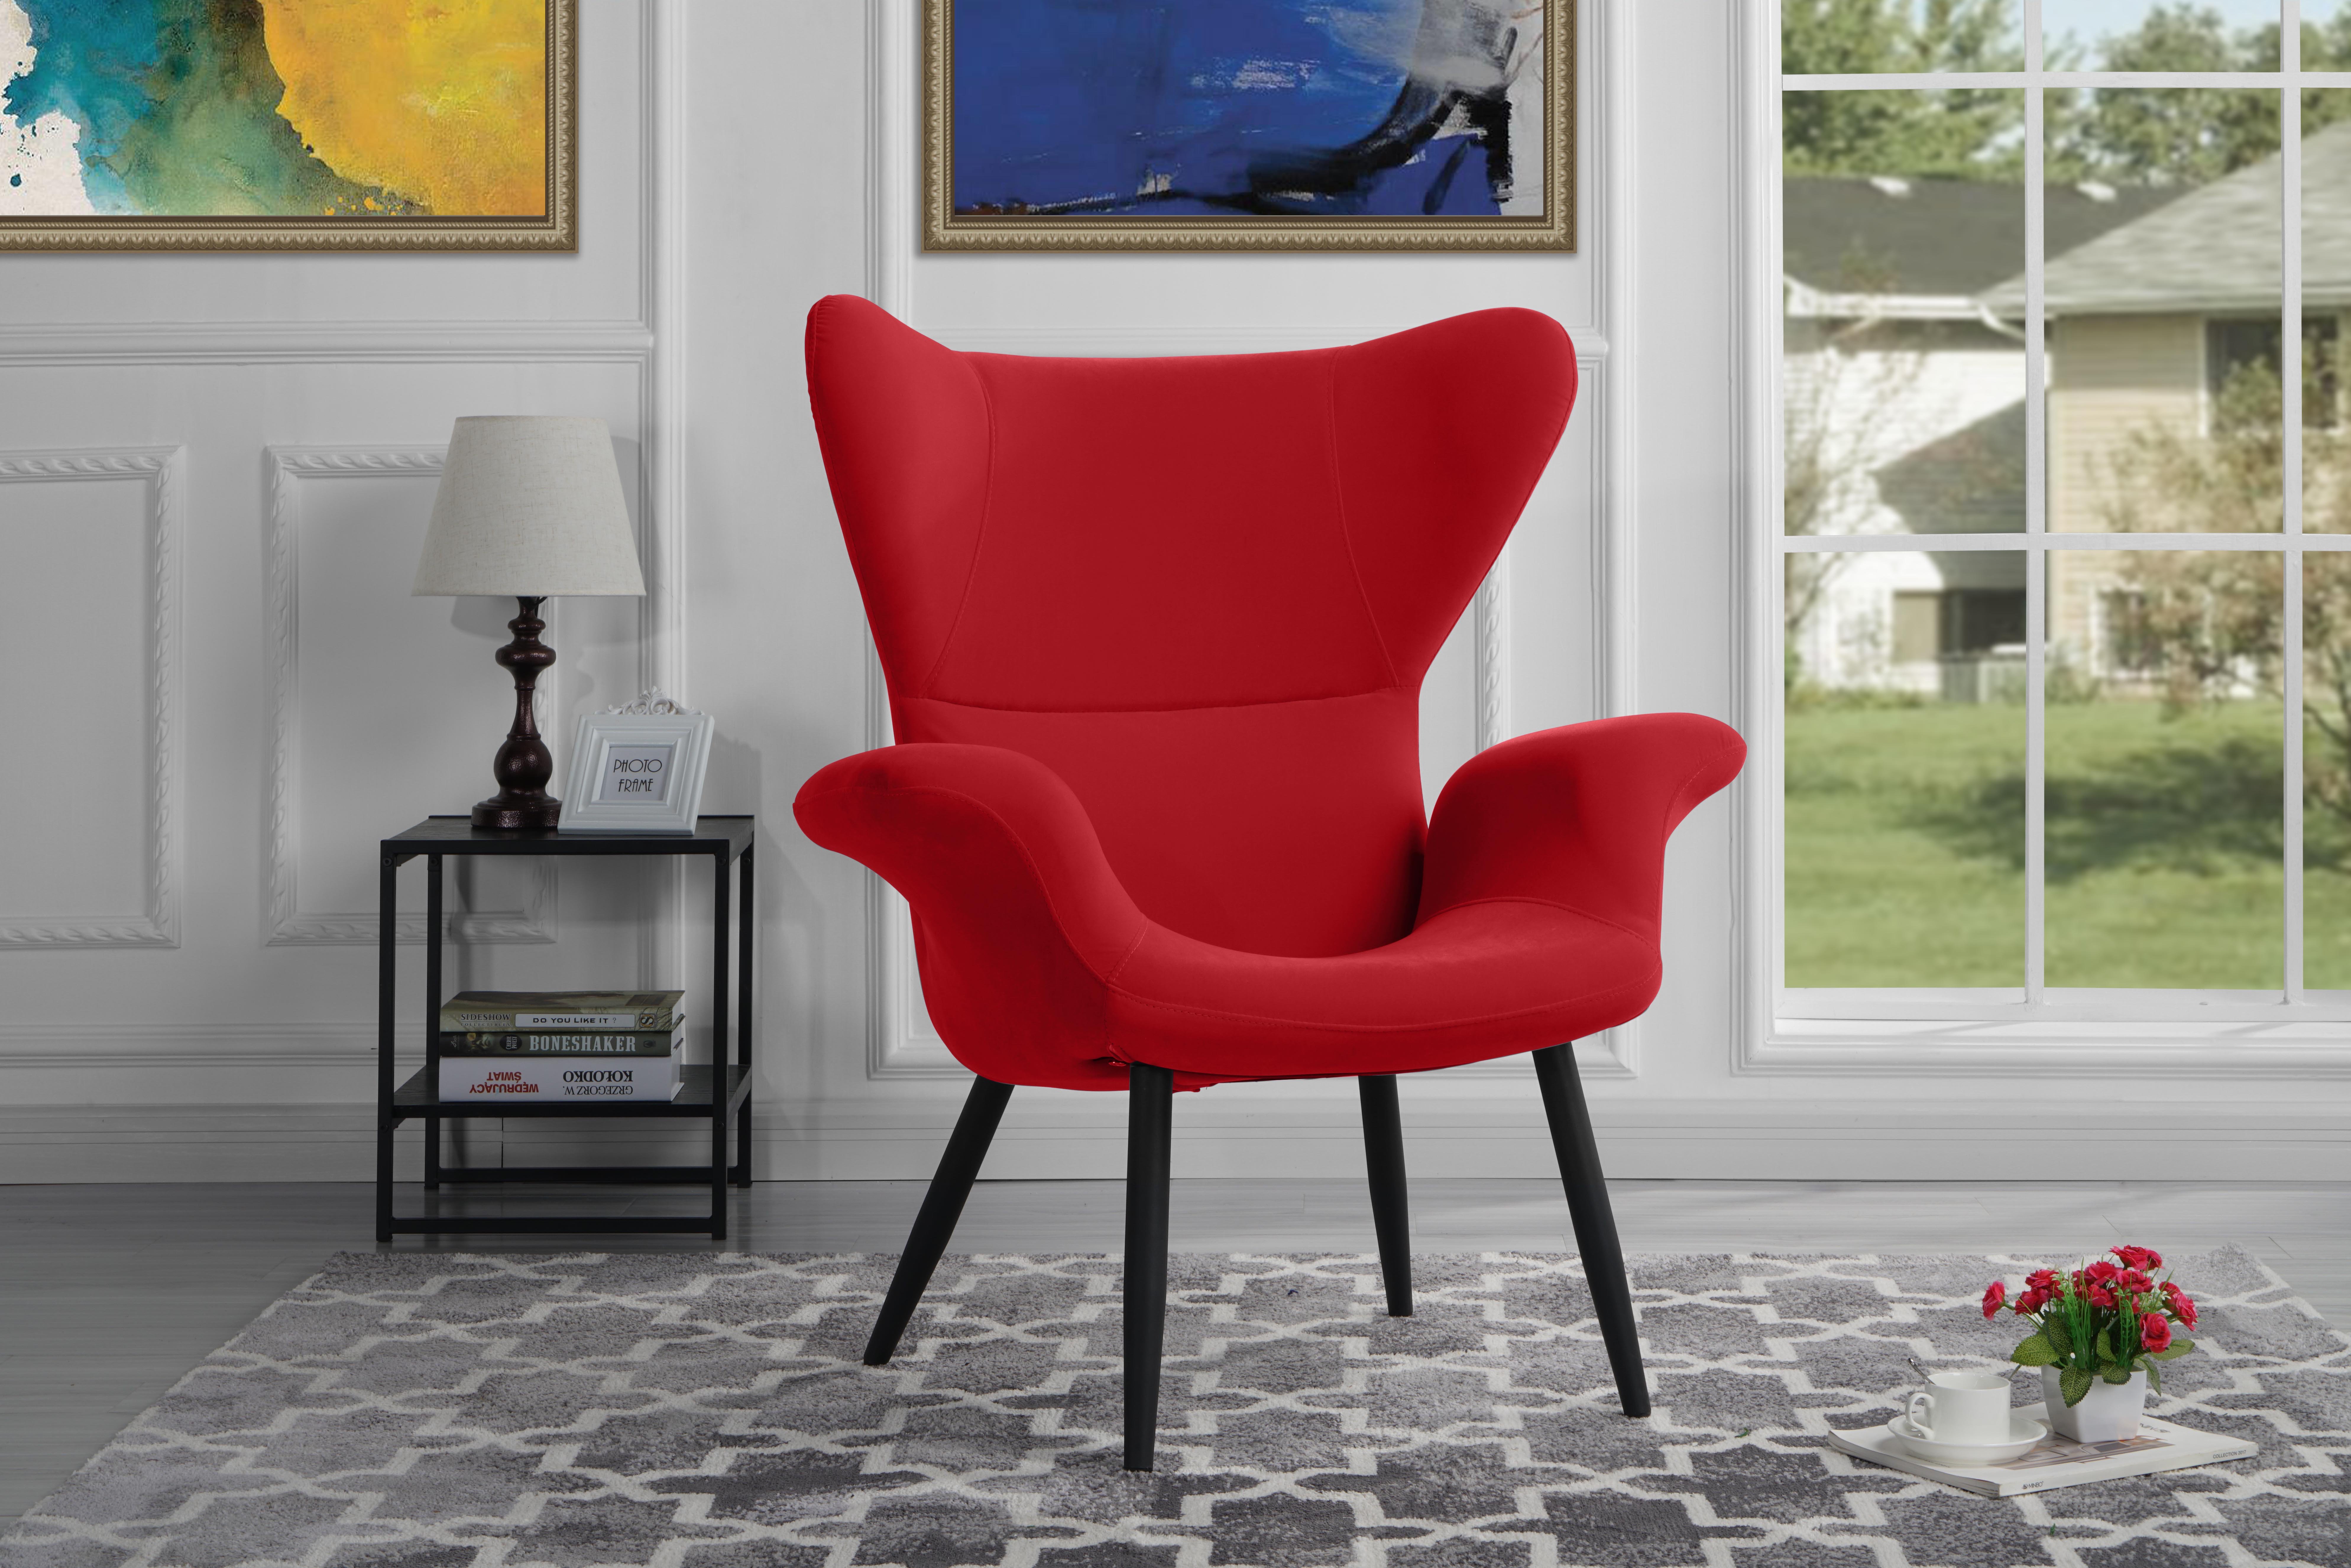 Contemporary Accent Chairs For Living Room Room Contemporary Living Accent Chair Velvet Red Armchair Style Futuristic